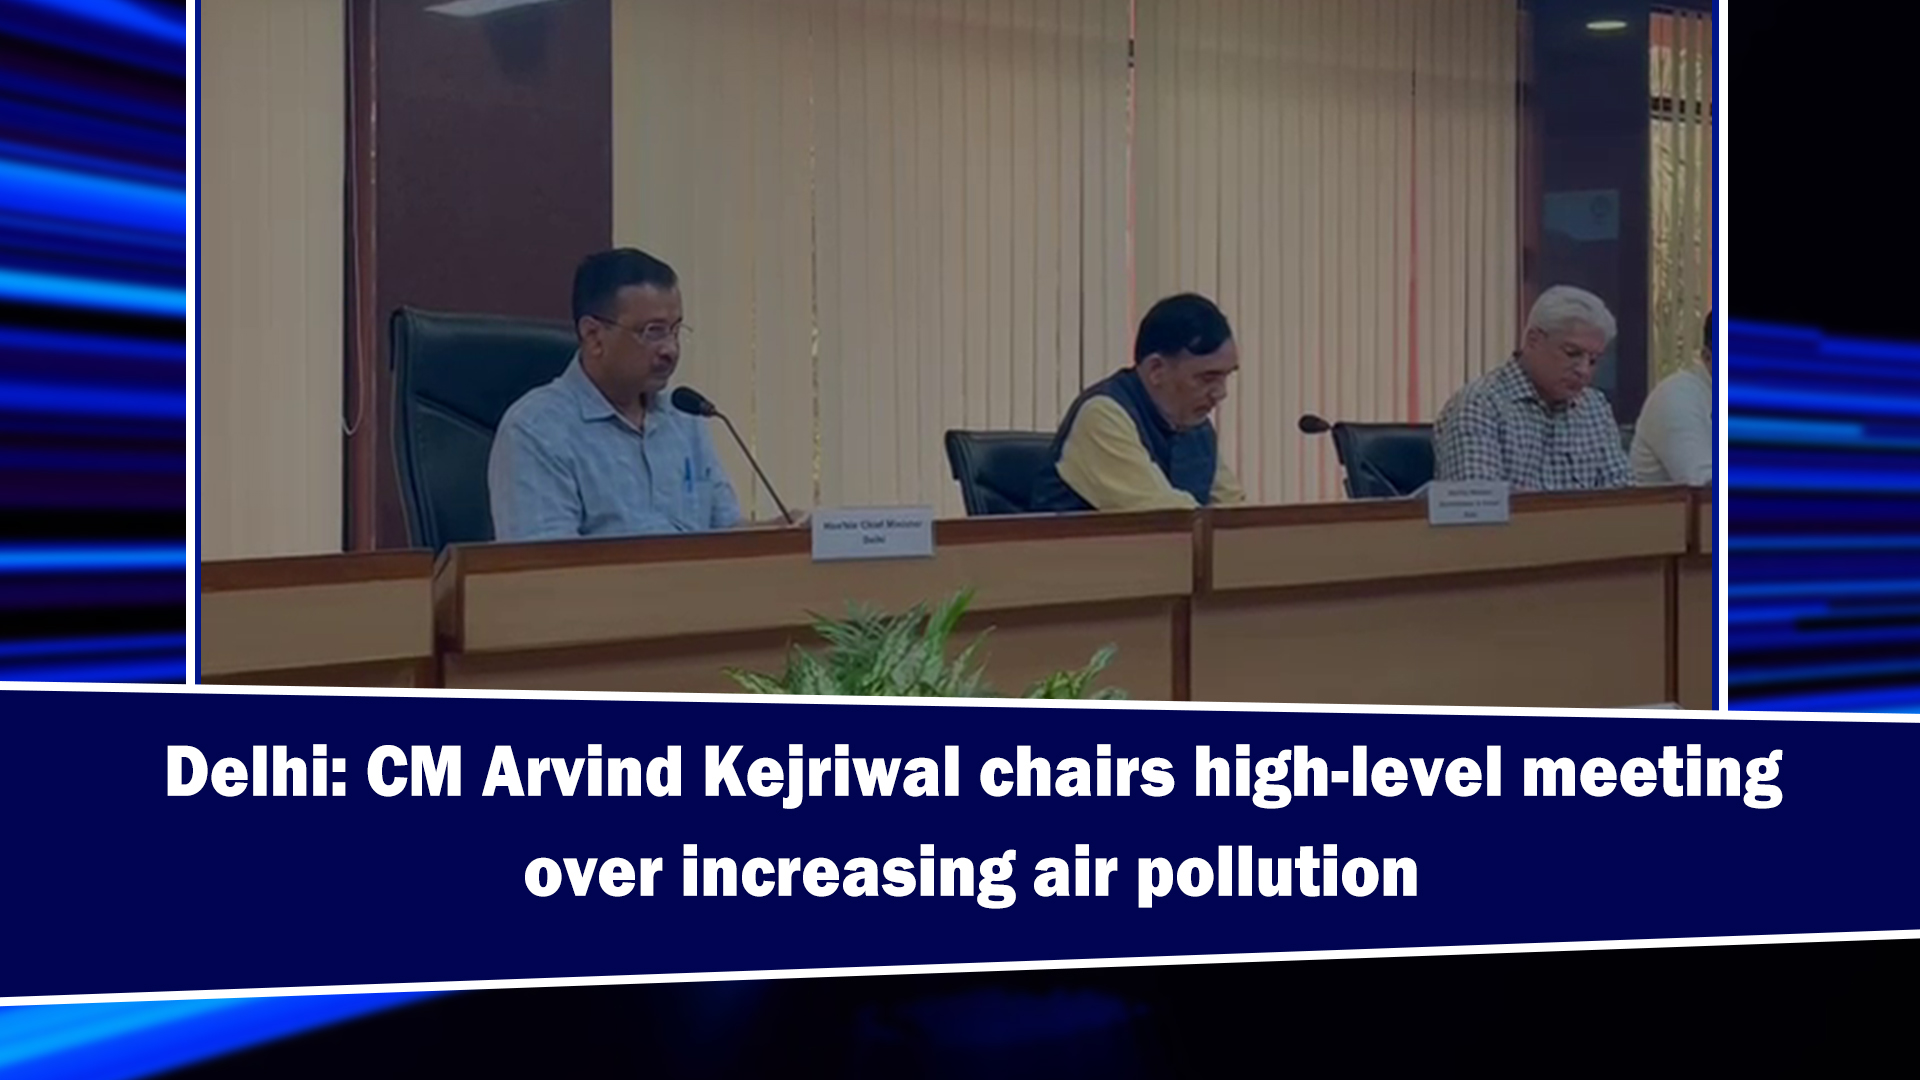 Delhi: CM Arvind Kejriwal chairs high-level meeting over increasing air pollution